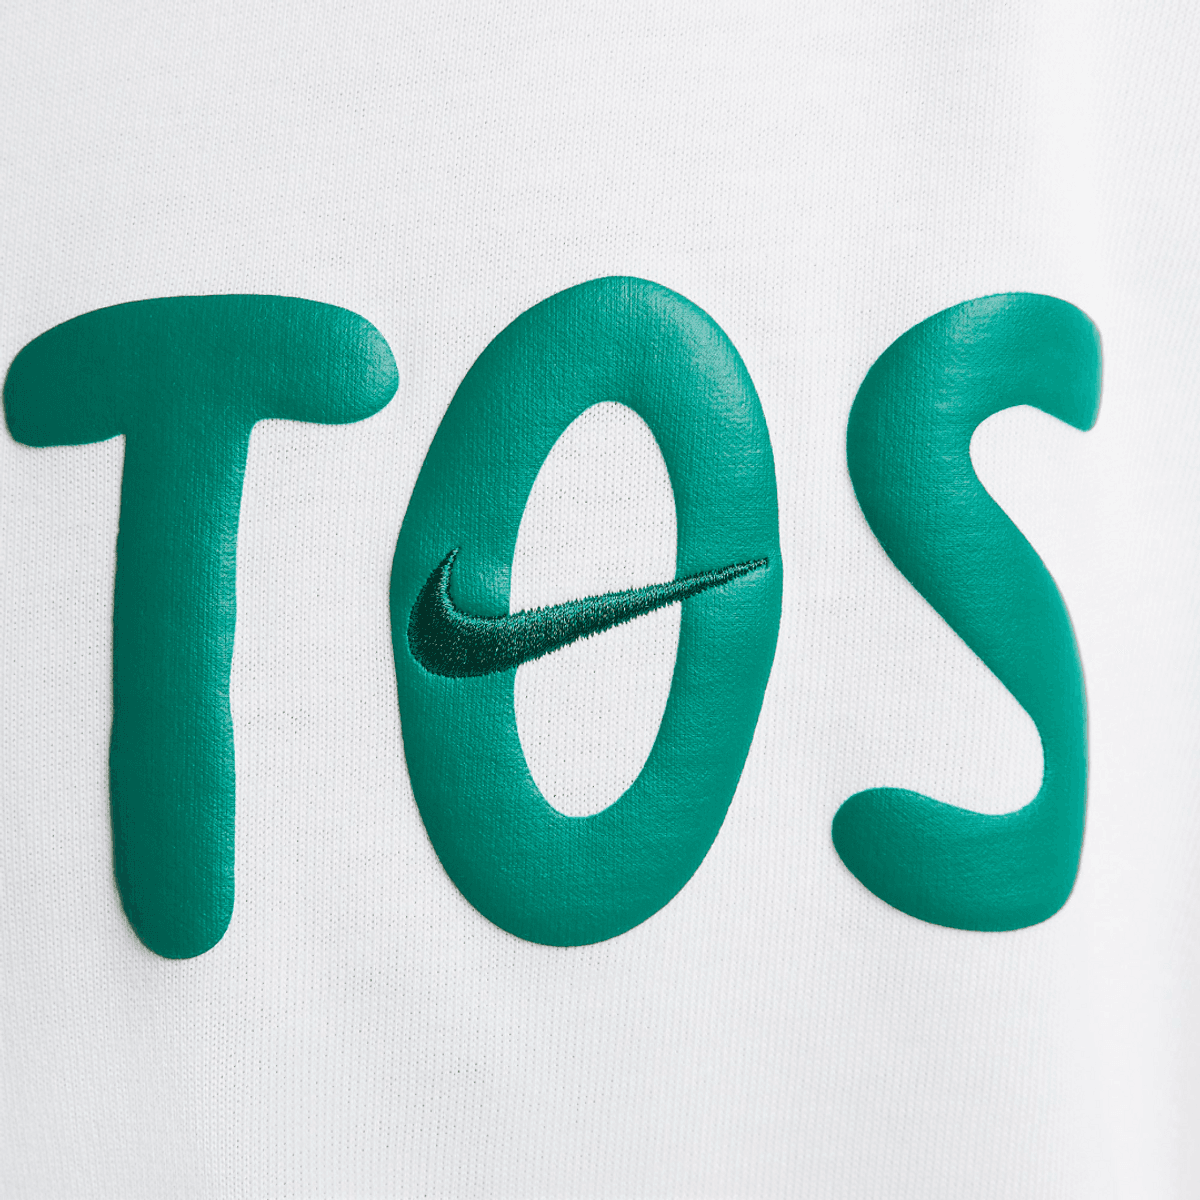 Pop The Top On The Nike SB x Jarritos Clothing Collection